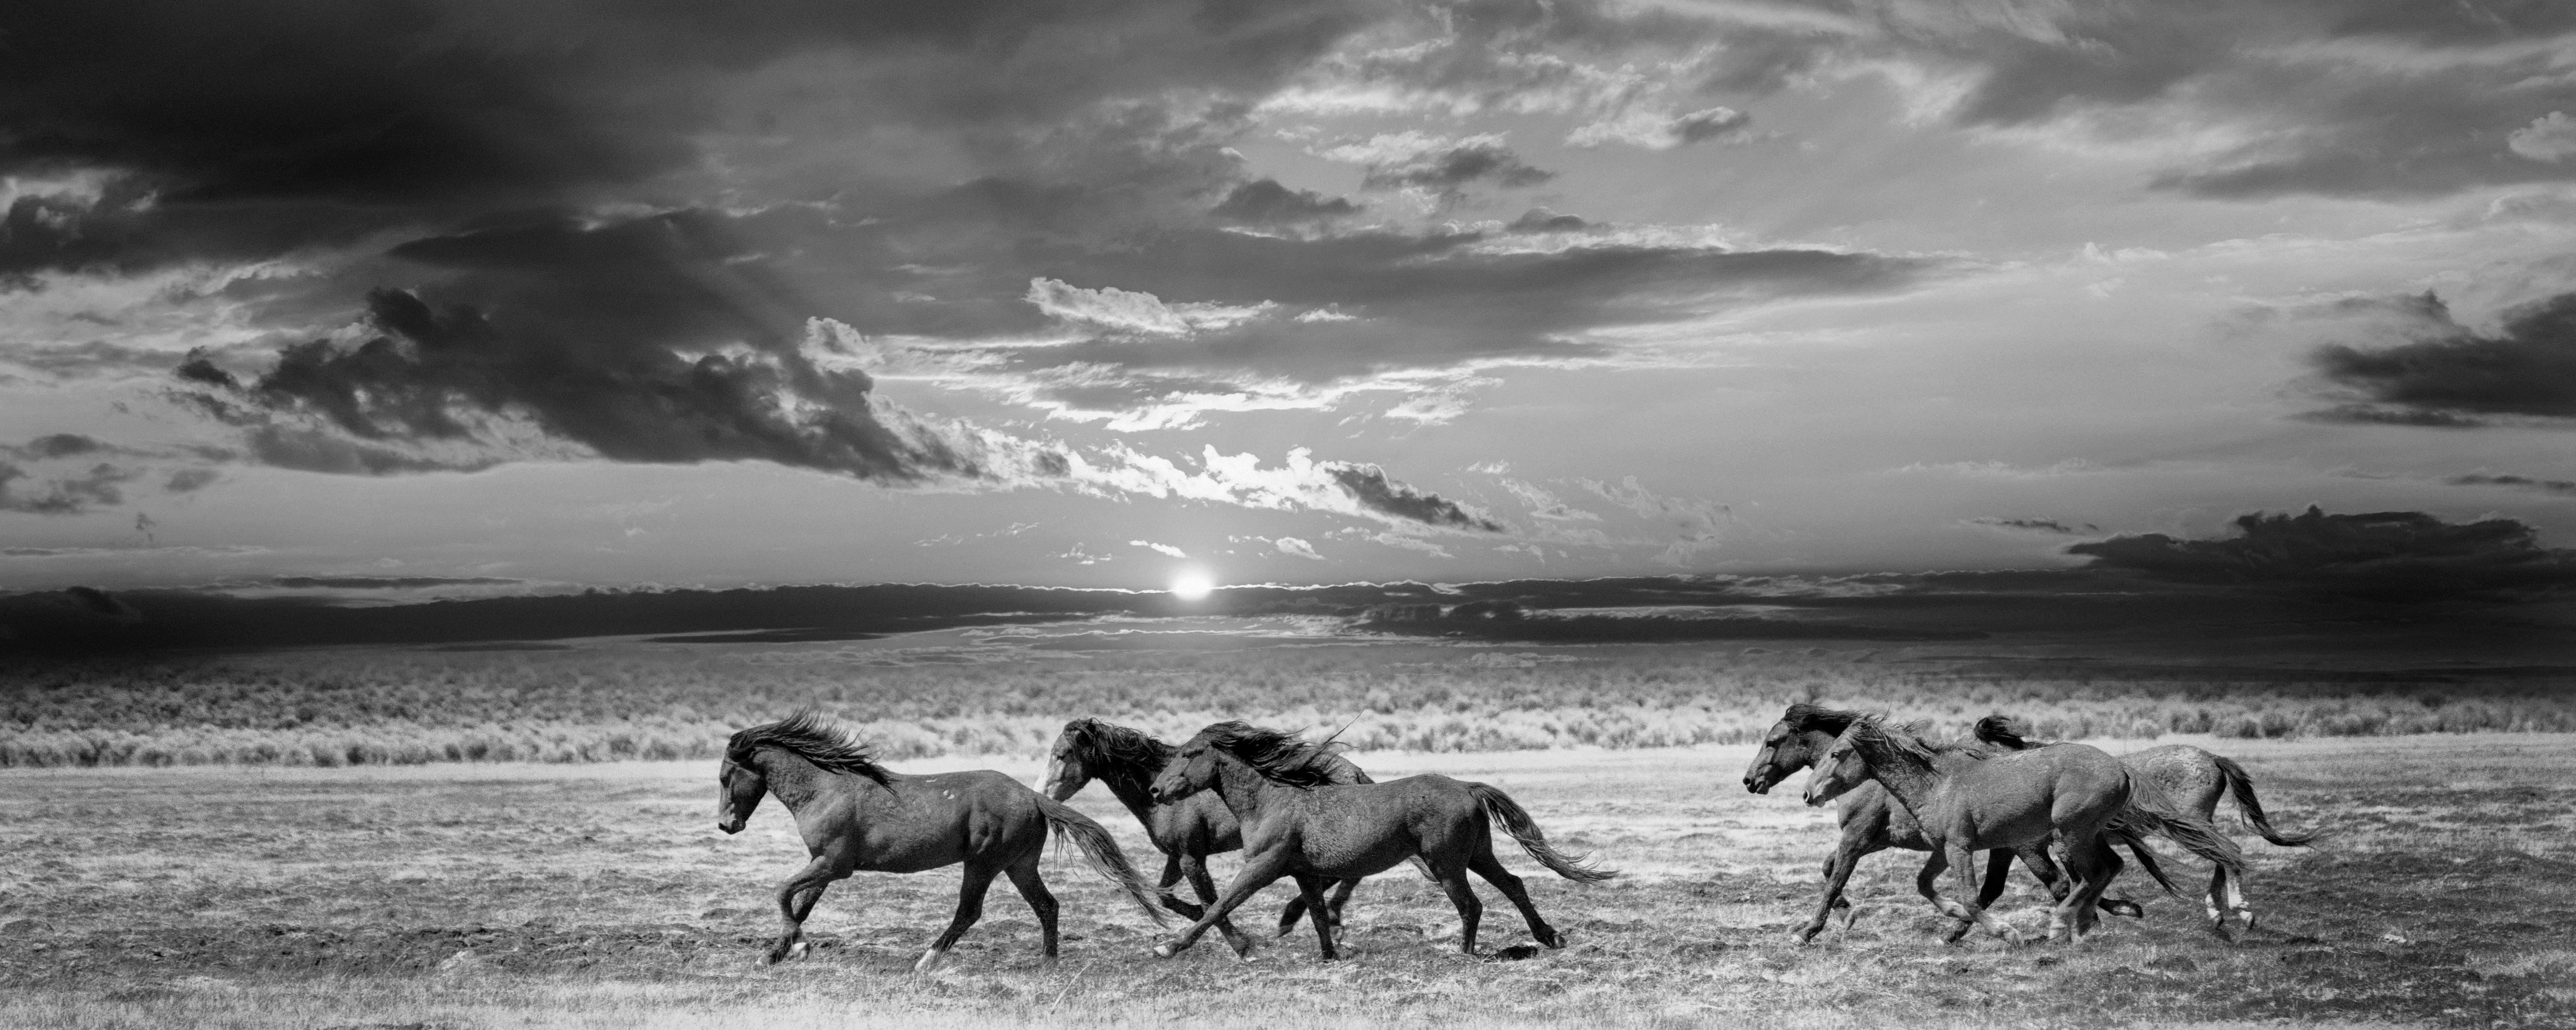 Shane Russeck Black and White Photograph - Chasing the Light  48x120 Photography of Wild Horses Mustangs Photograph